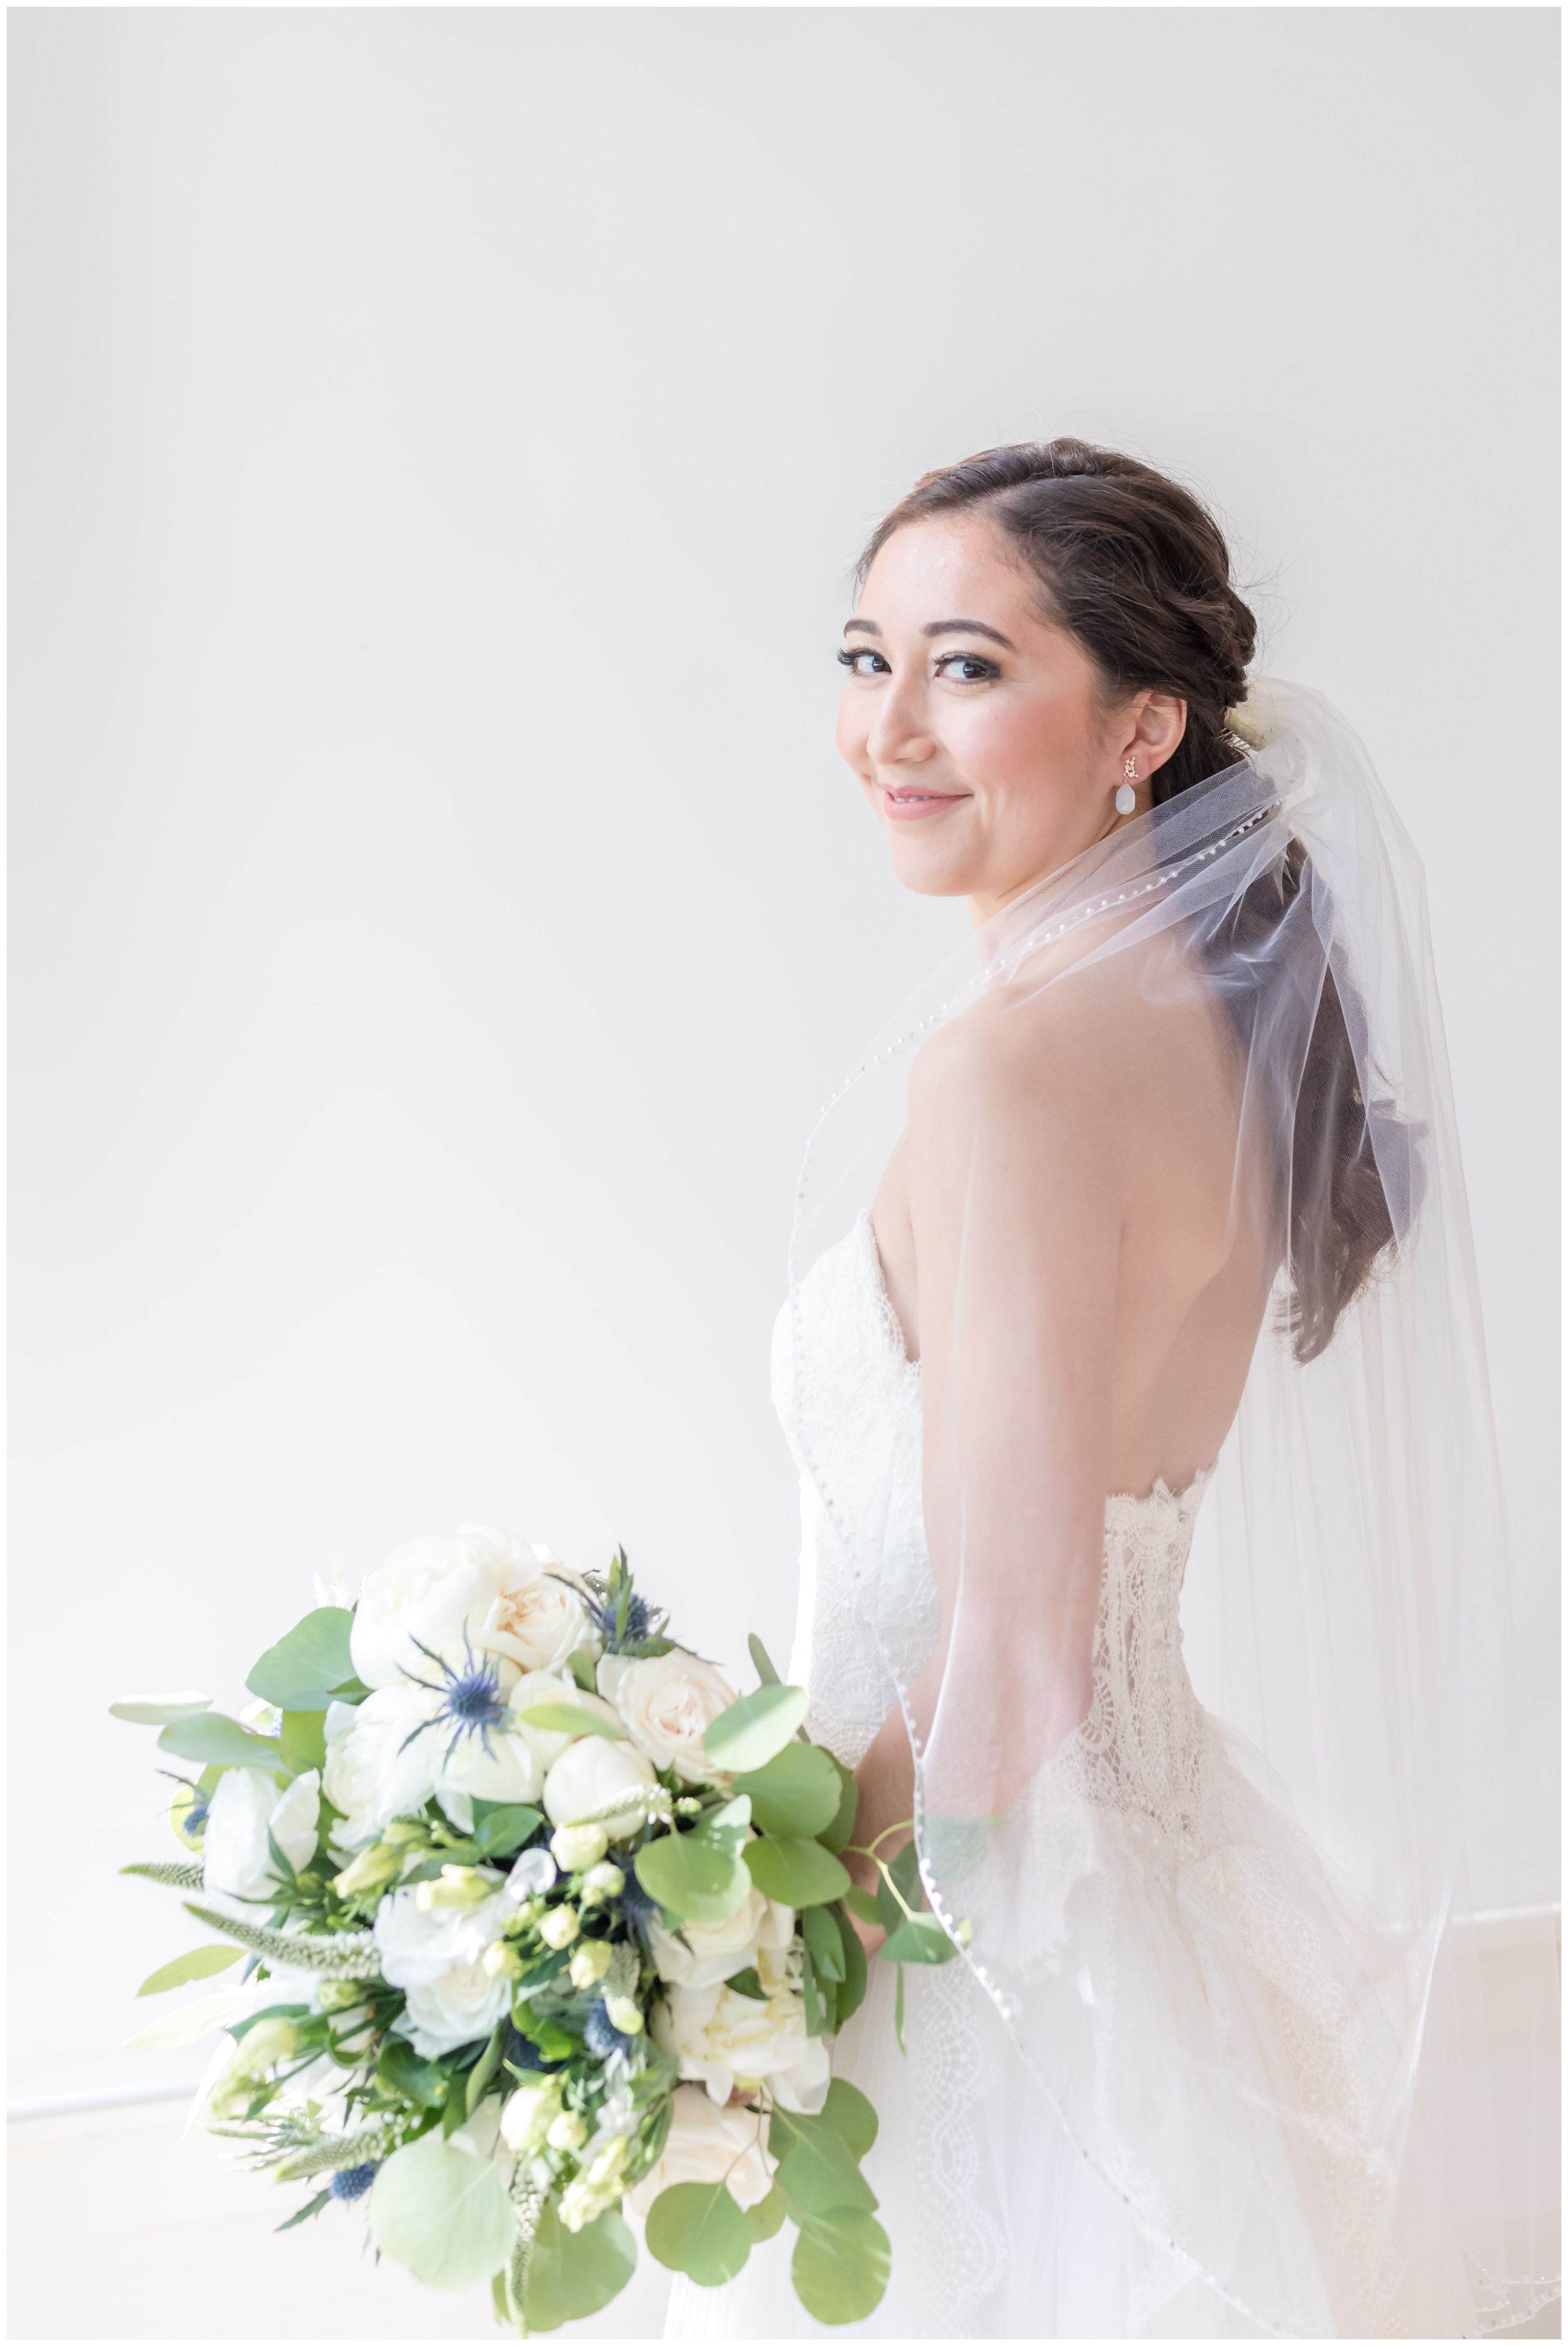 Bridal portrait with white peonies and roses bridal bouquet in strapless wedding white ballgown and veil